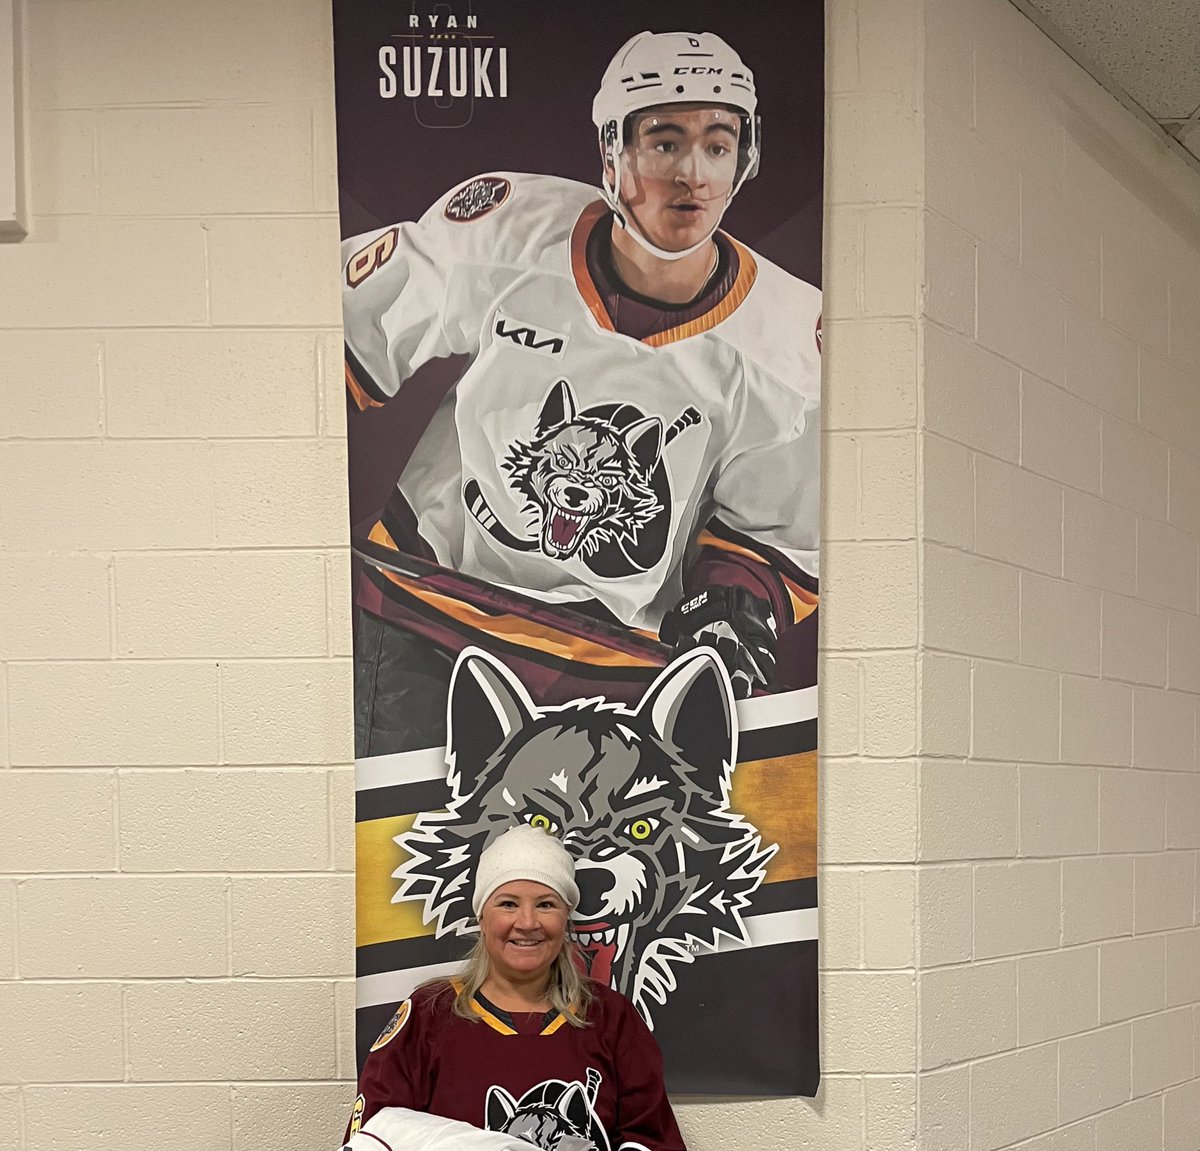 So excited to see @RSuzuki61 at a home game!!!                #gowolvesgo @Chicago_Wolves